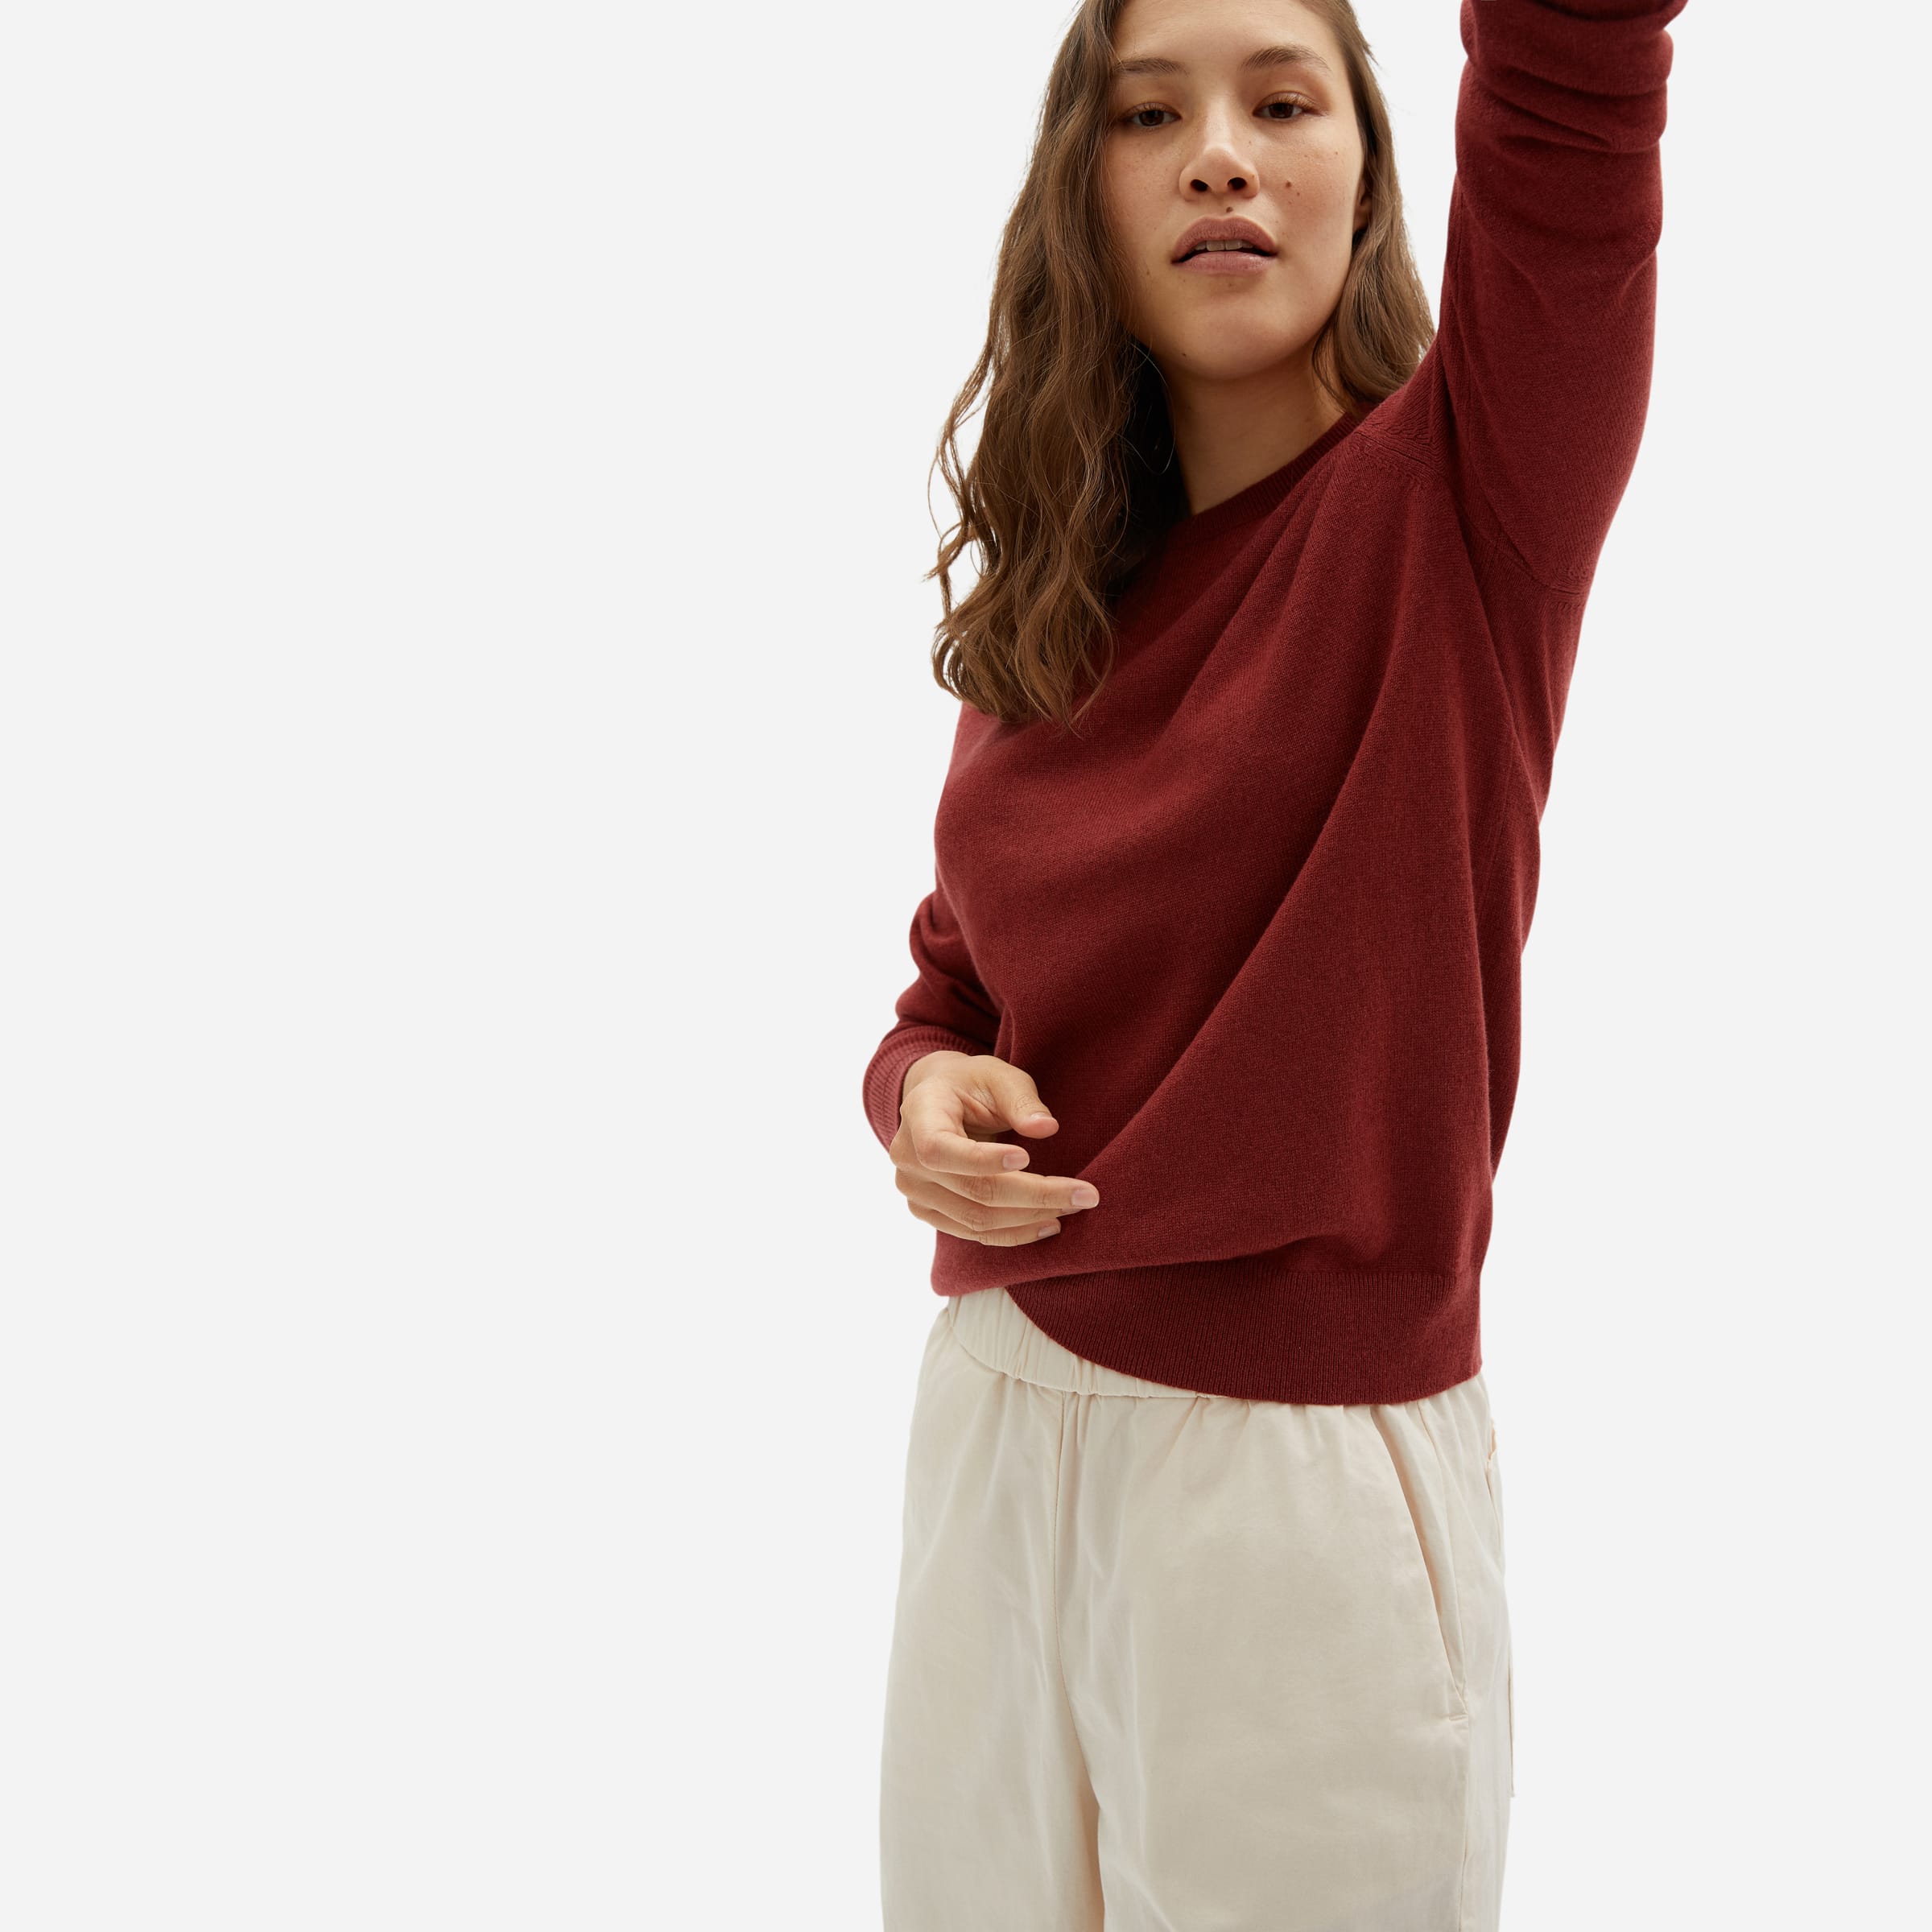 Everlane Cashmere Sale - 36-Hour Deals For $75 Sweaters